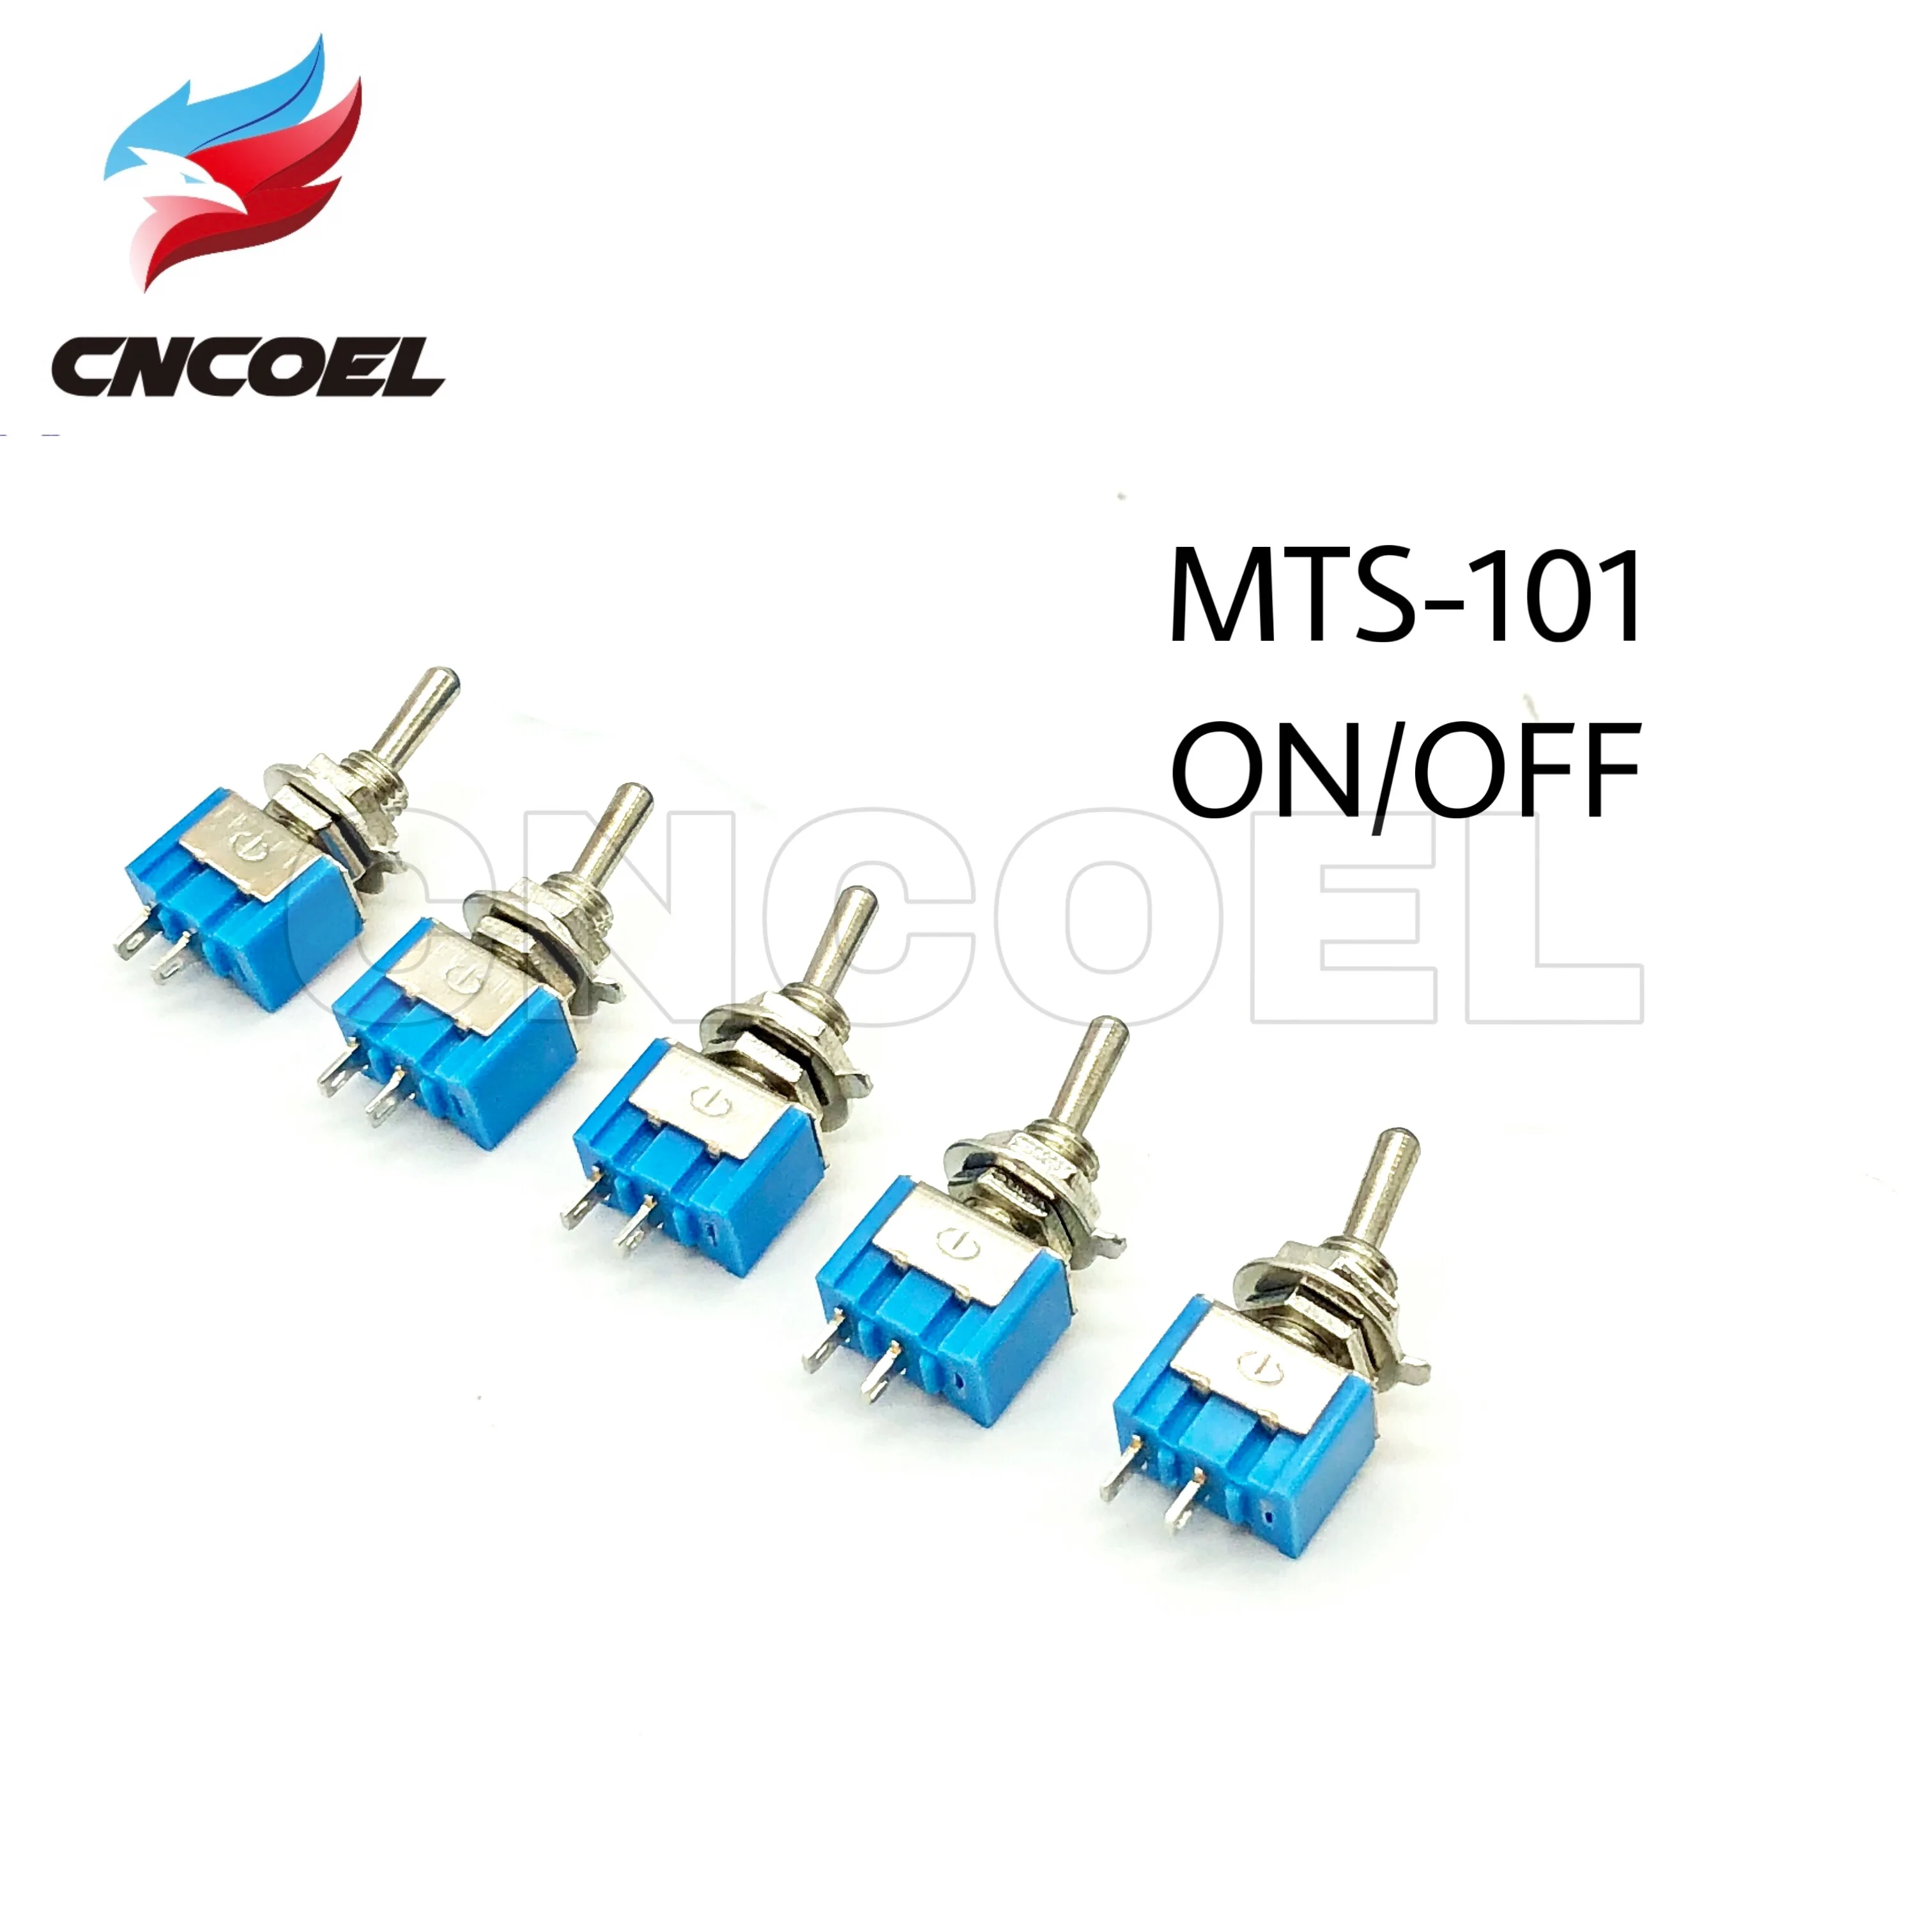 

5pcs MTS-101 2 Pin SPST Switch ON-OFF 2 Position 6A 250V AC Mini Electrical Toggle Switches 6MM Mounting Hole